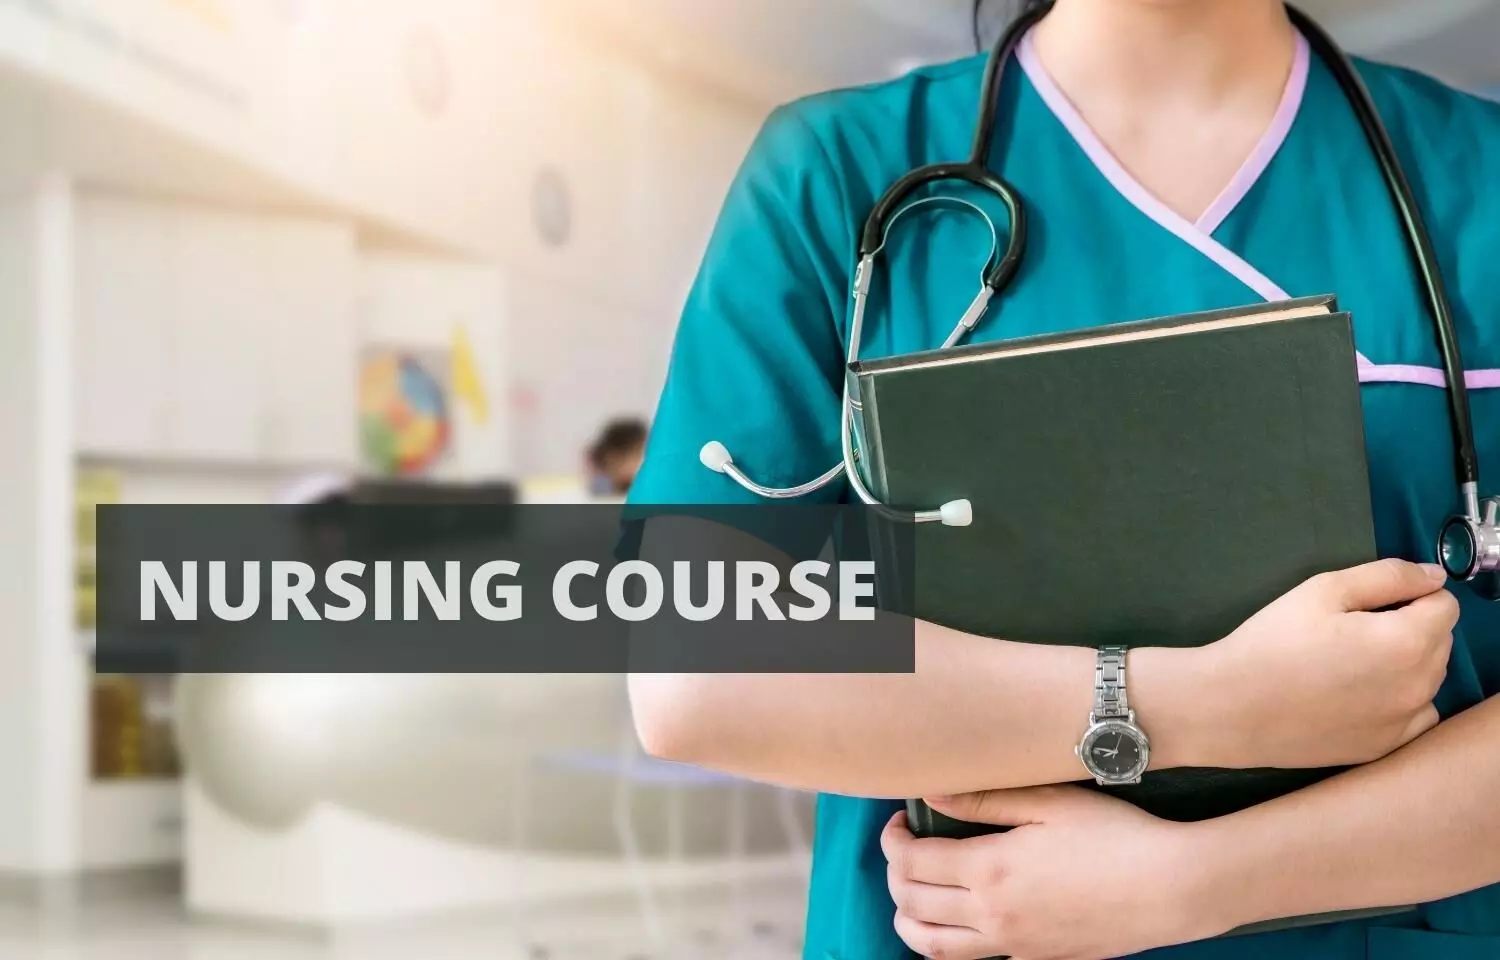 MSc Nursing Admissions 2021: TN Health releases Round 2 Counselling schedule, Details